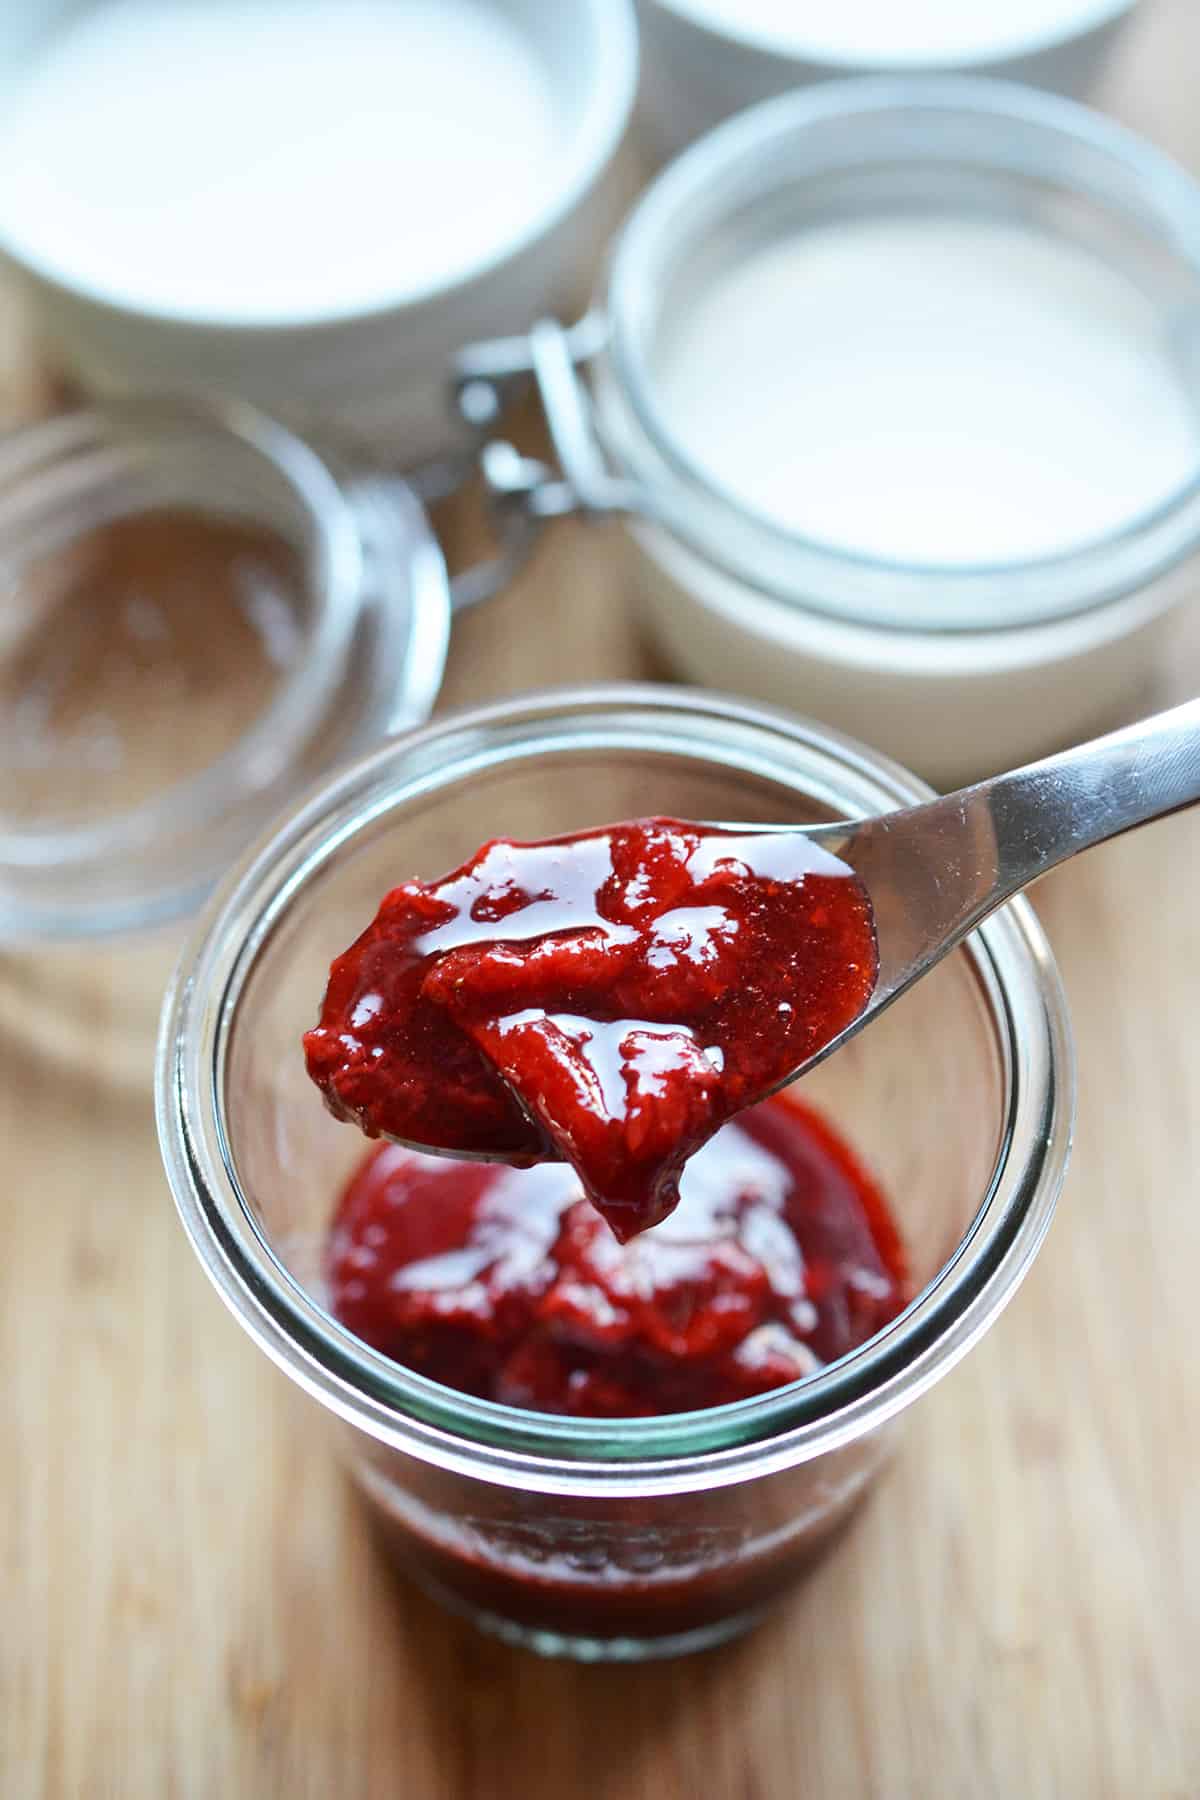 A spoonful of strawberry compote from a glass jar filled with it.